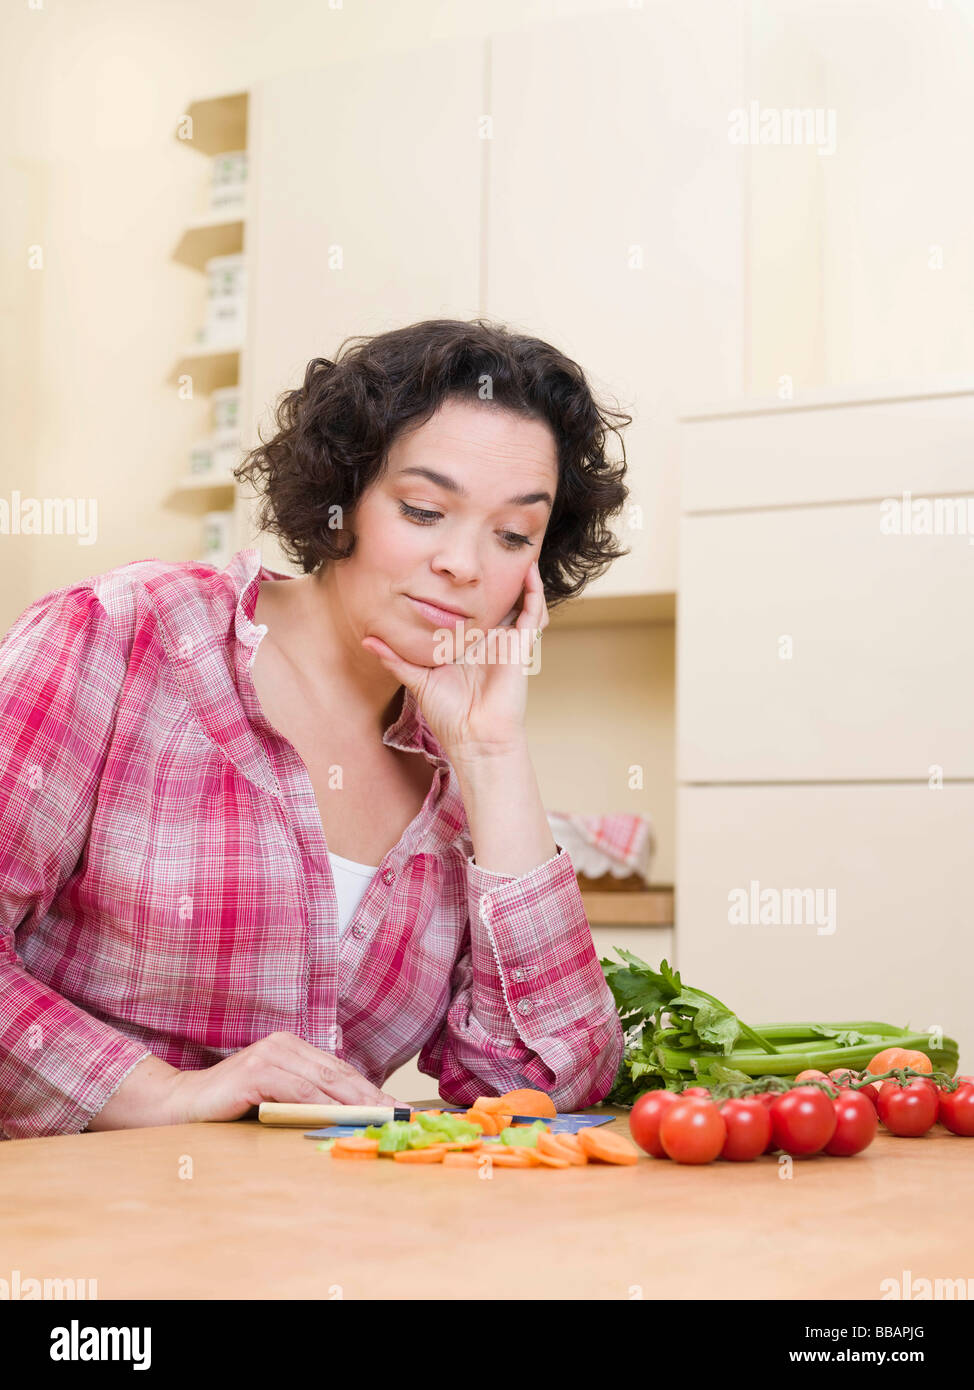 woman looking doubtfully at vegetables Stock Photo